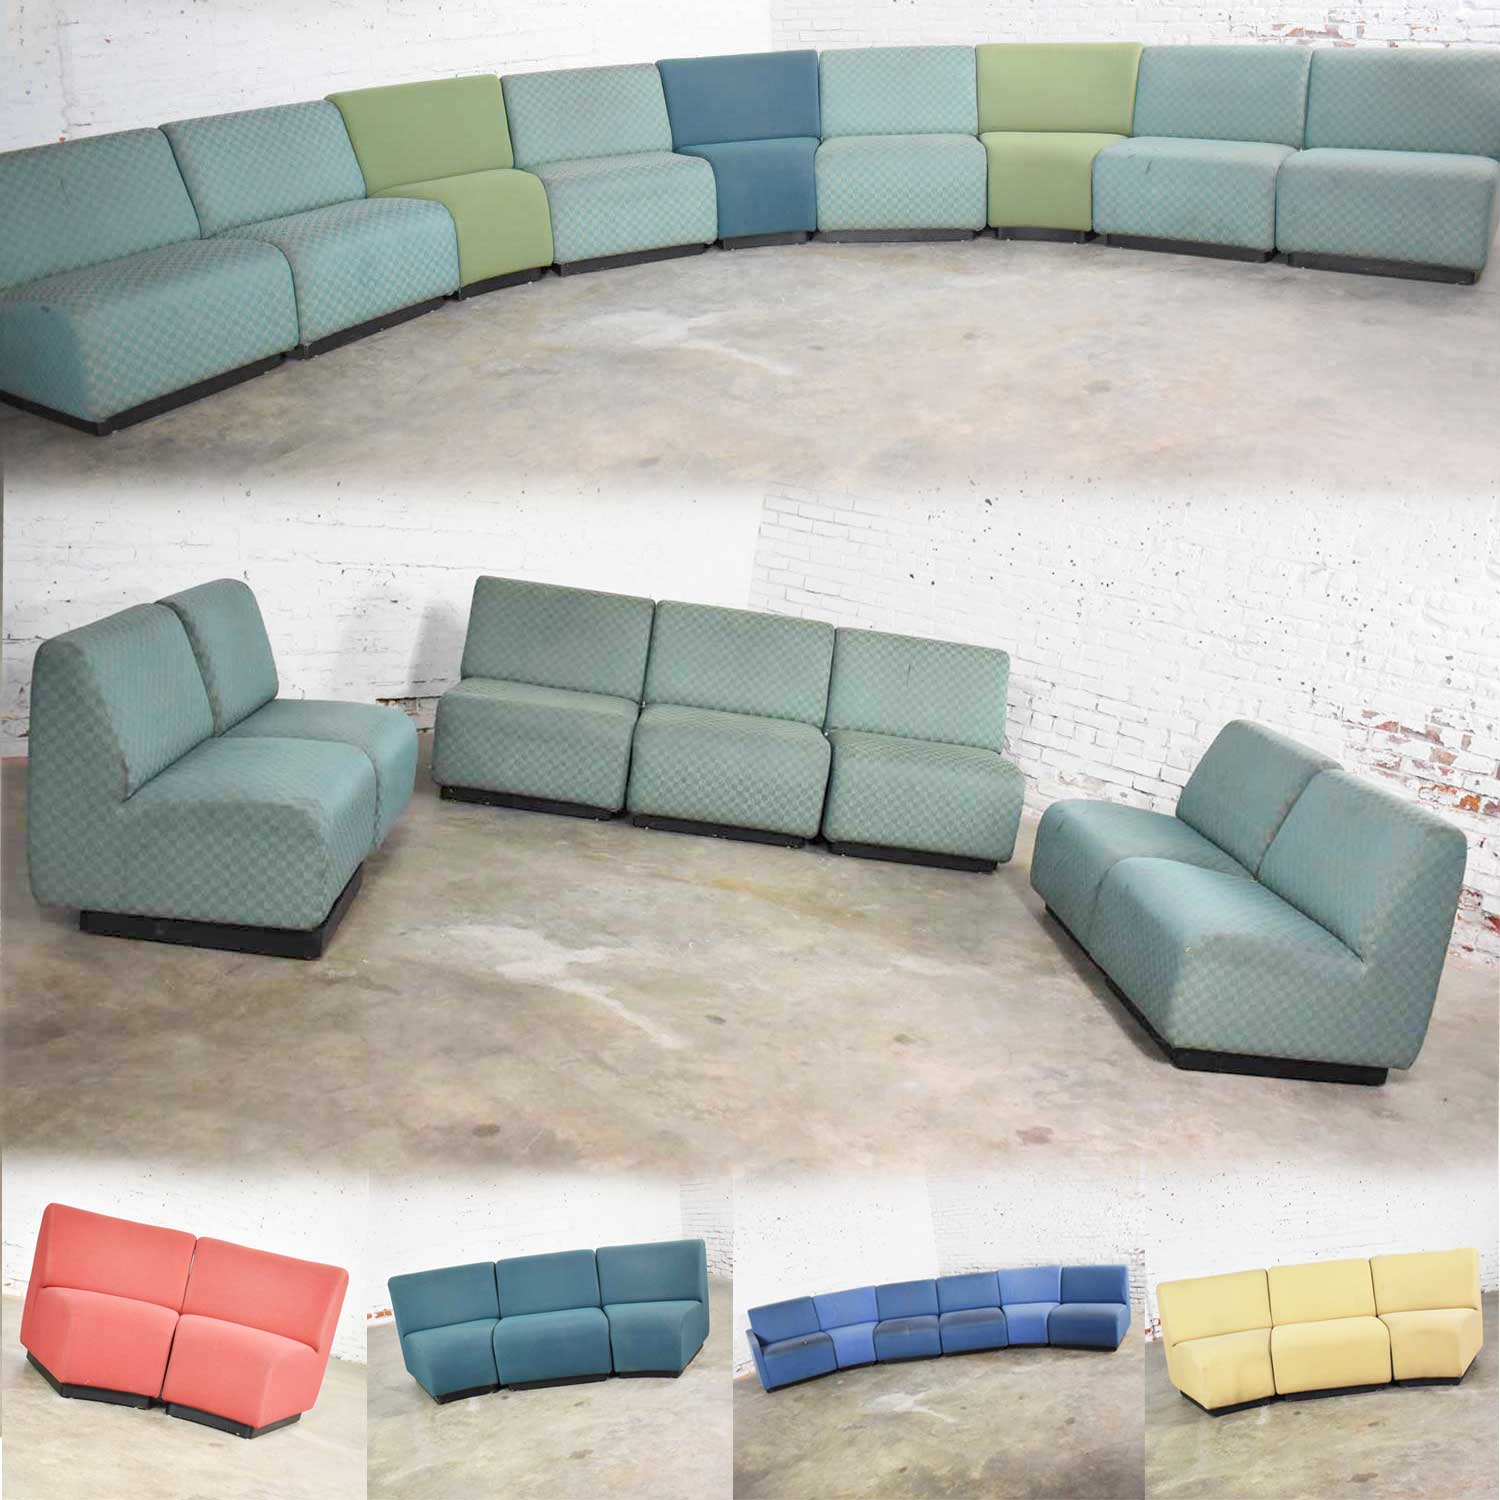 August Inc Modern Modular Sectional Sofa Straight & Wedge Pieces Style of Chadwick